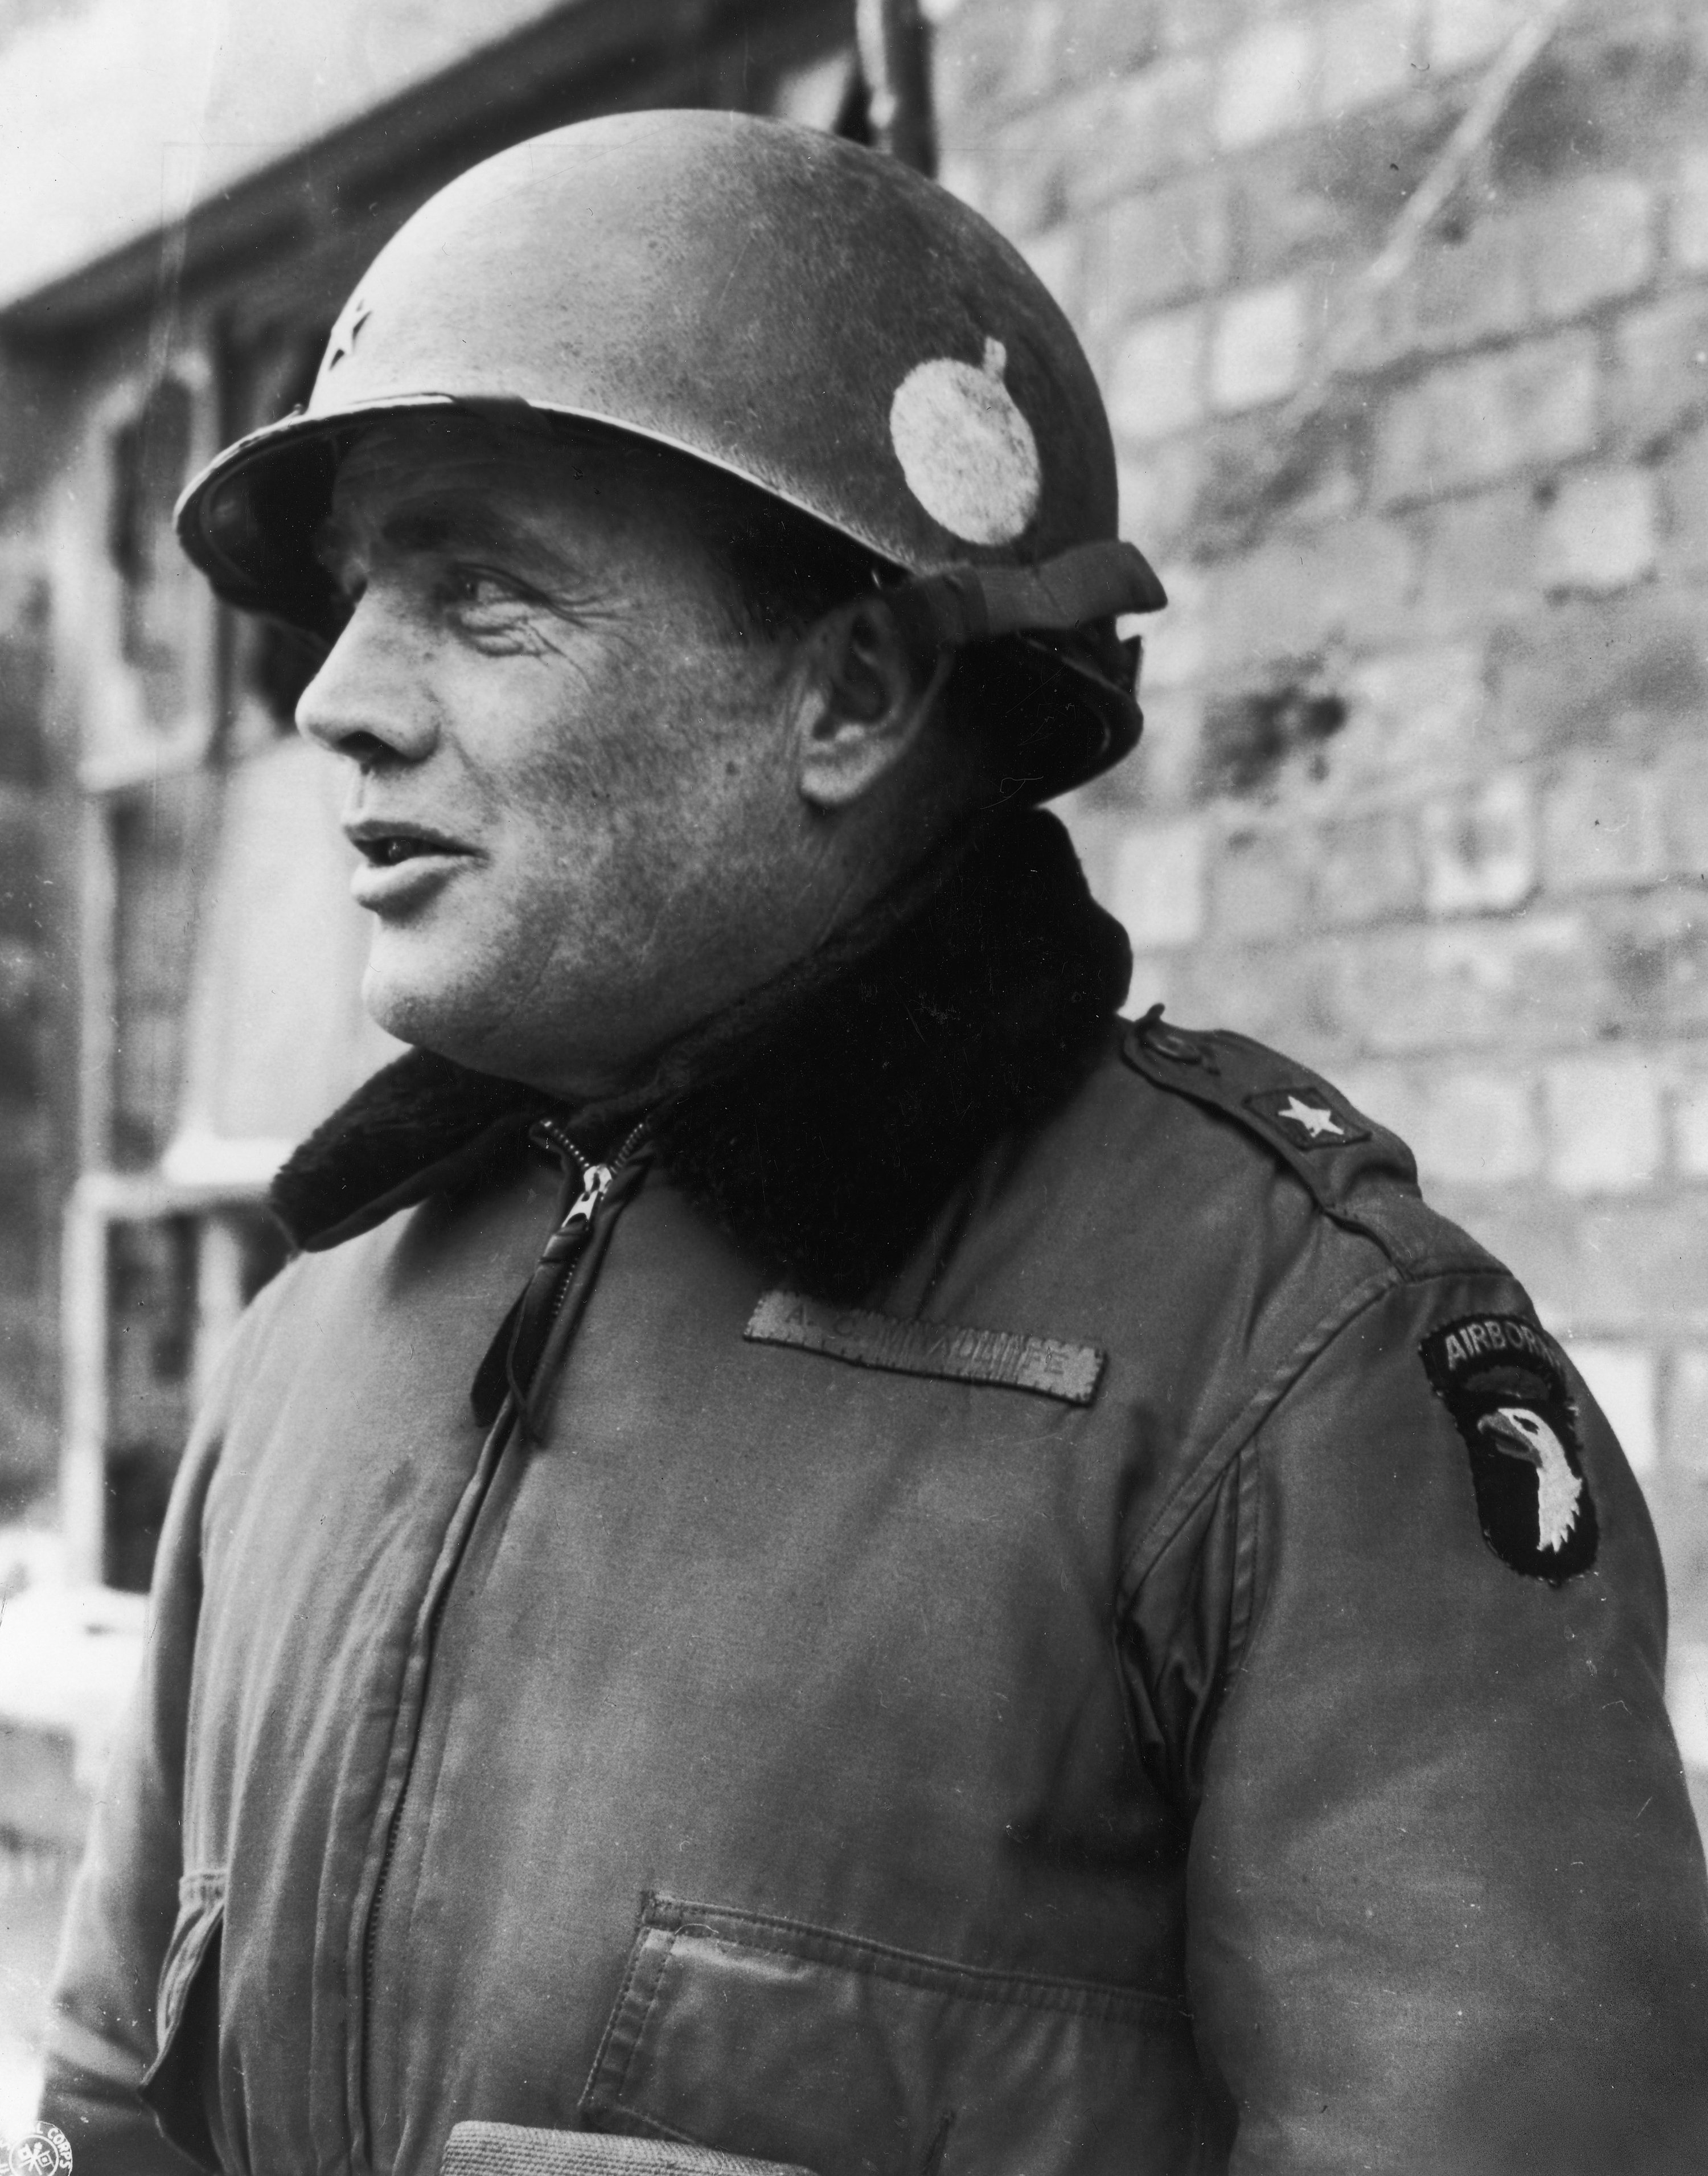 American General Anthony McAuliffe, commander of the 101st Airborne during the Battle of the Bulge. When the Germans demanded the surrender of American troops who were outnumbered and surrounded in the town of Bastogne, McAuliffe replied to the ultimatum with a now-legendary one-word response:  Nuts!” -- which a milder way of saying  F— you.  His men withstood several German attacks until they could be relieved by the 4th Armored Division.